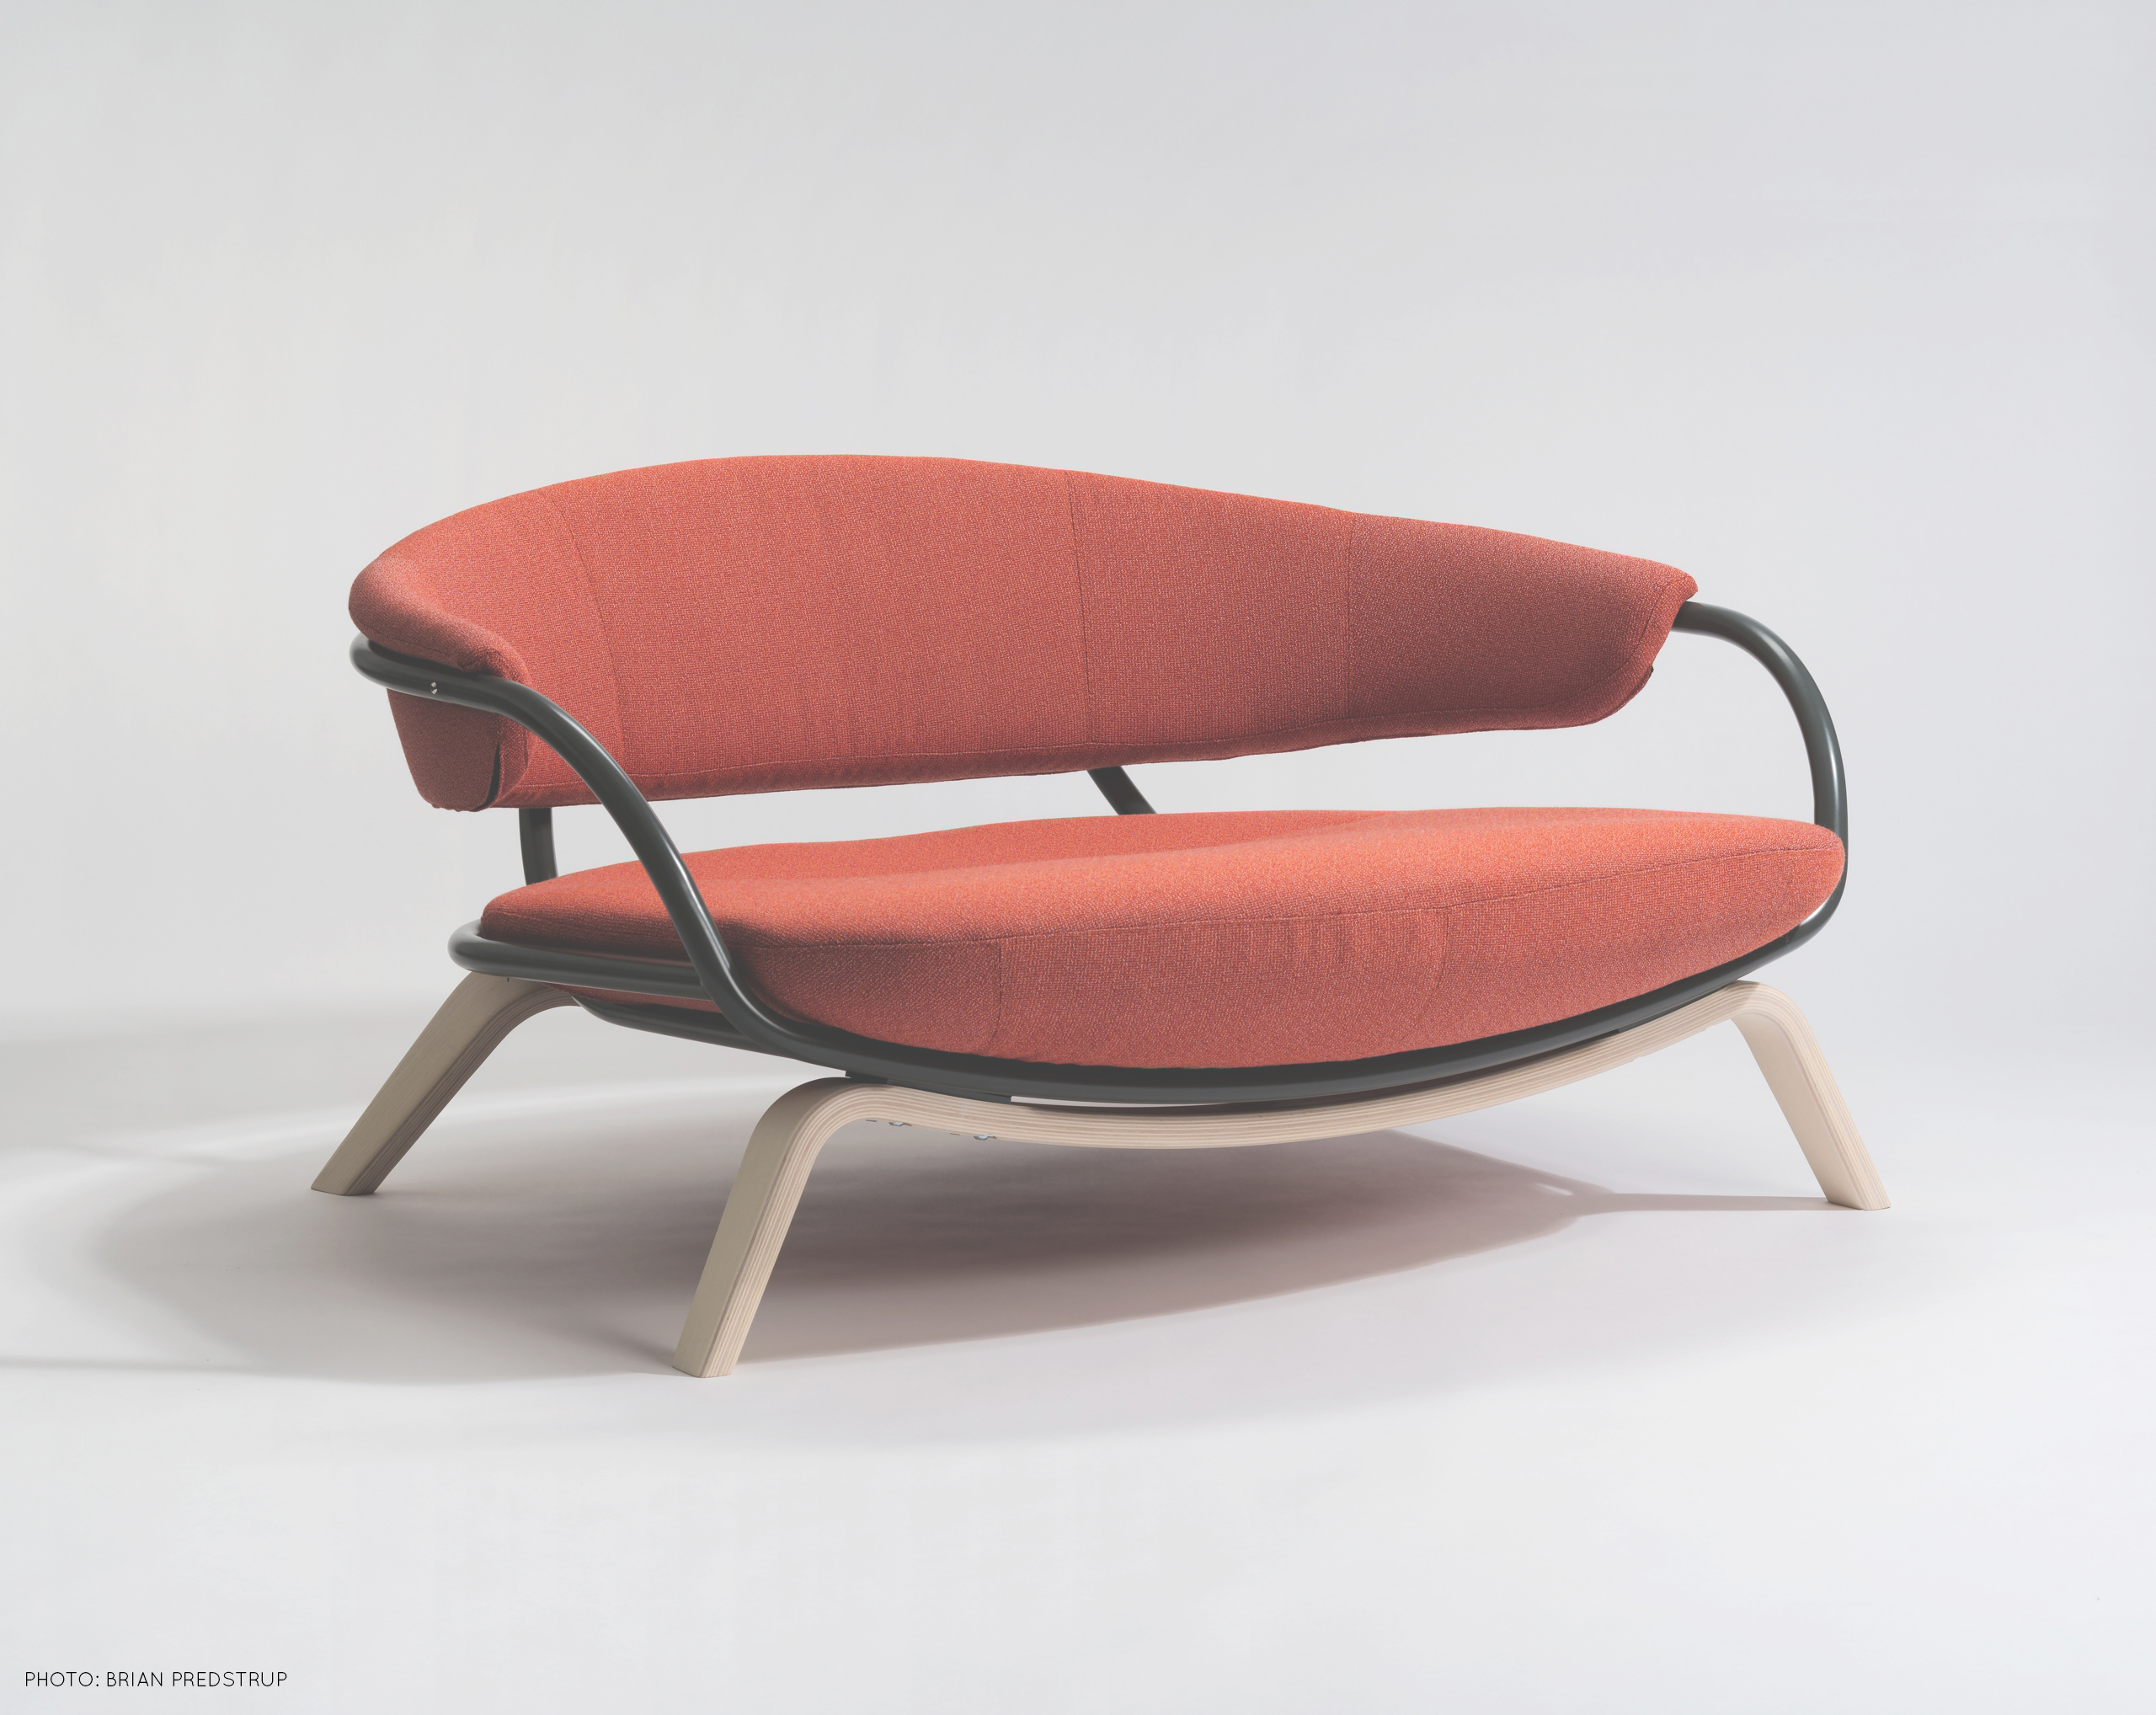 Orange armchair for two persons, inspired by Ingmar Bergman and built in Småland, by Sebastian Galo